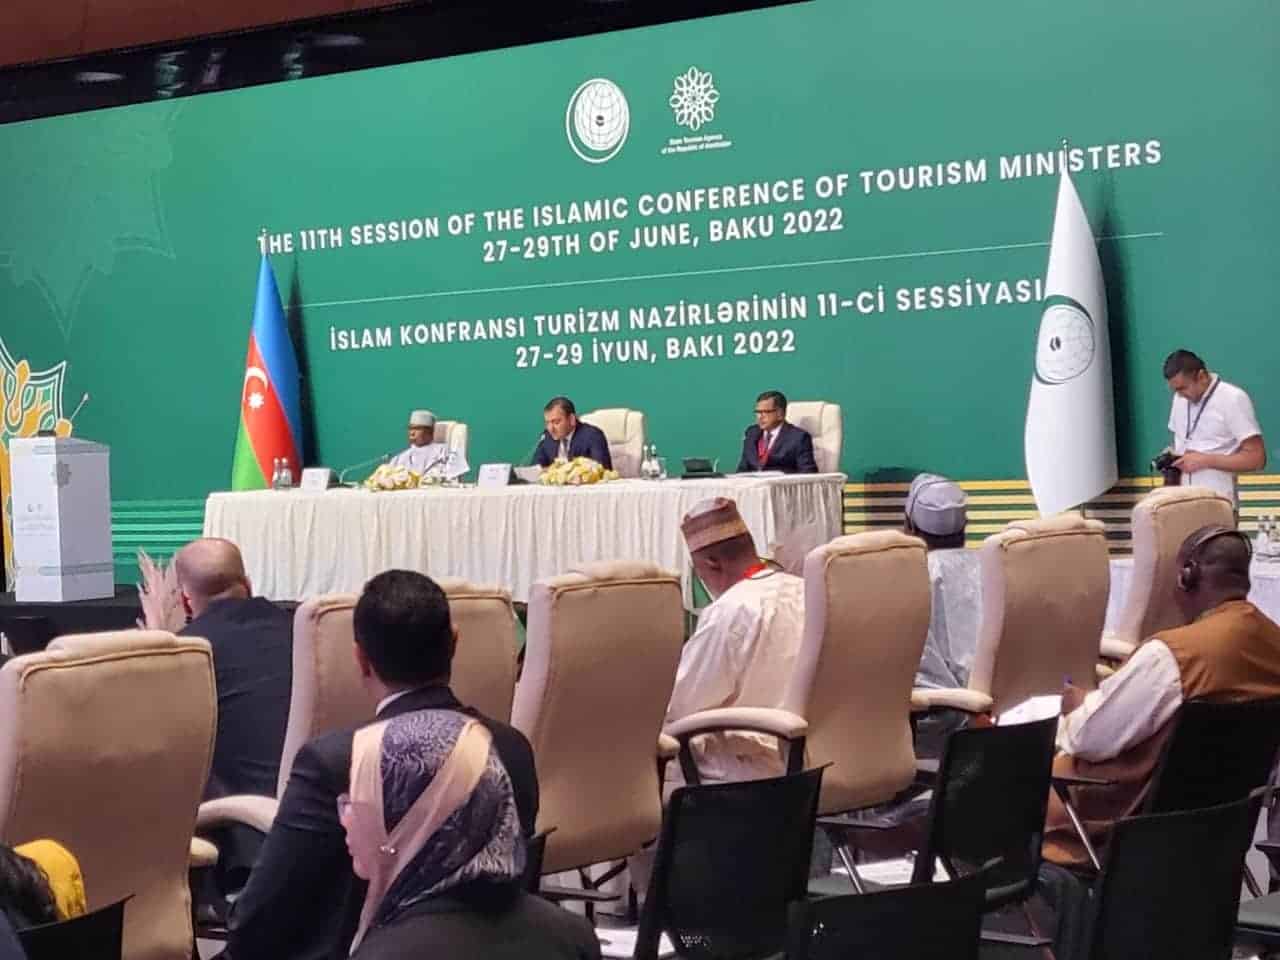 ICDT’s Director General presentation during the 11th Islamic Conference of Tourism Ministers held from 27 to 29 June 2022 in Baku, Azerbaijan